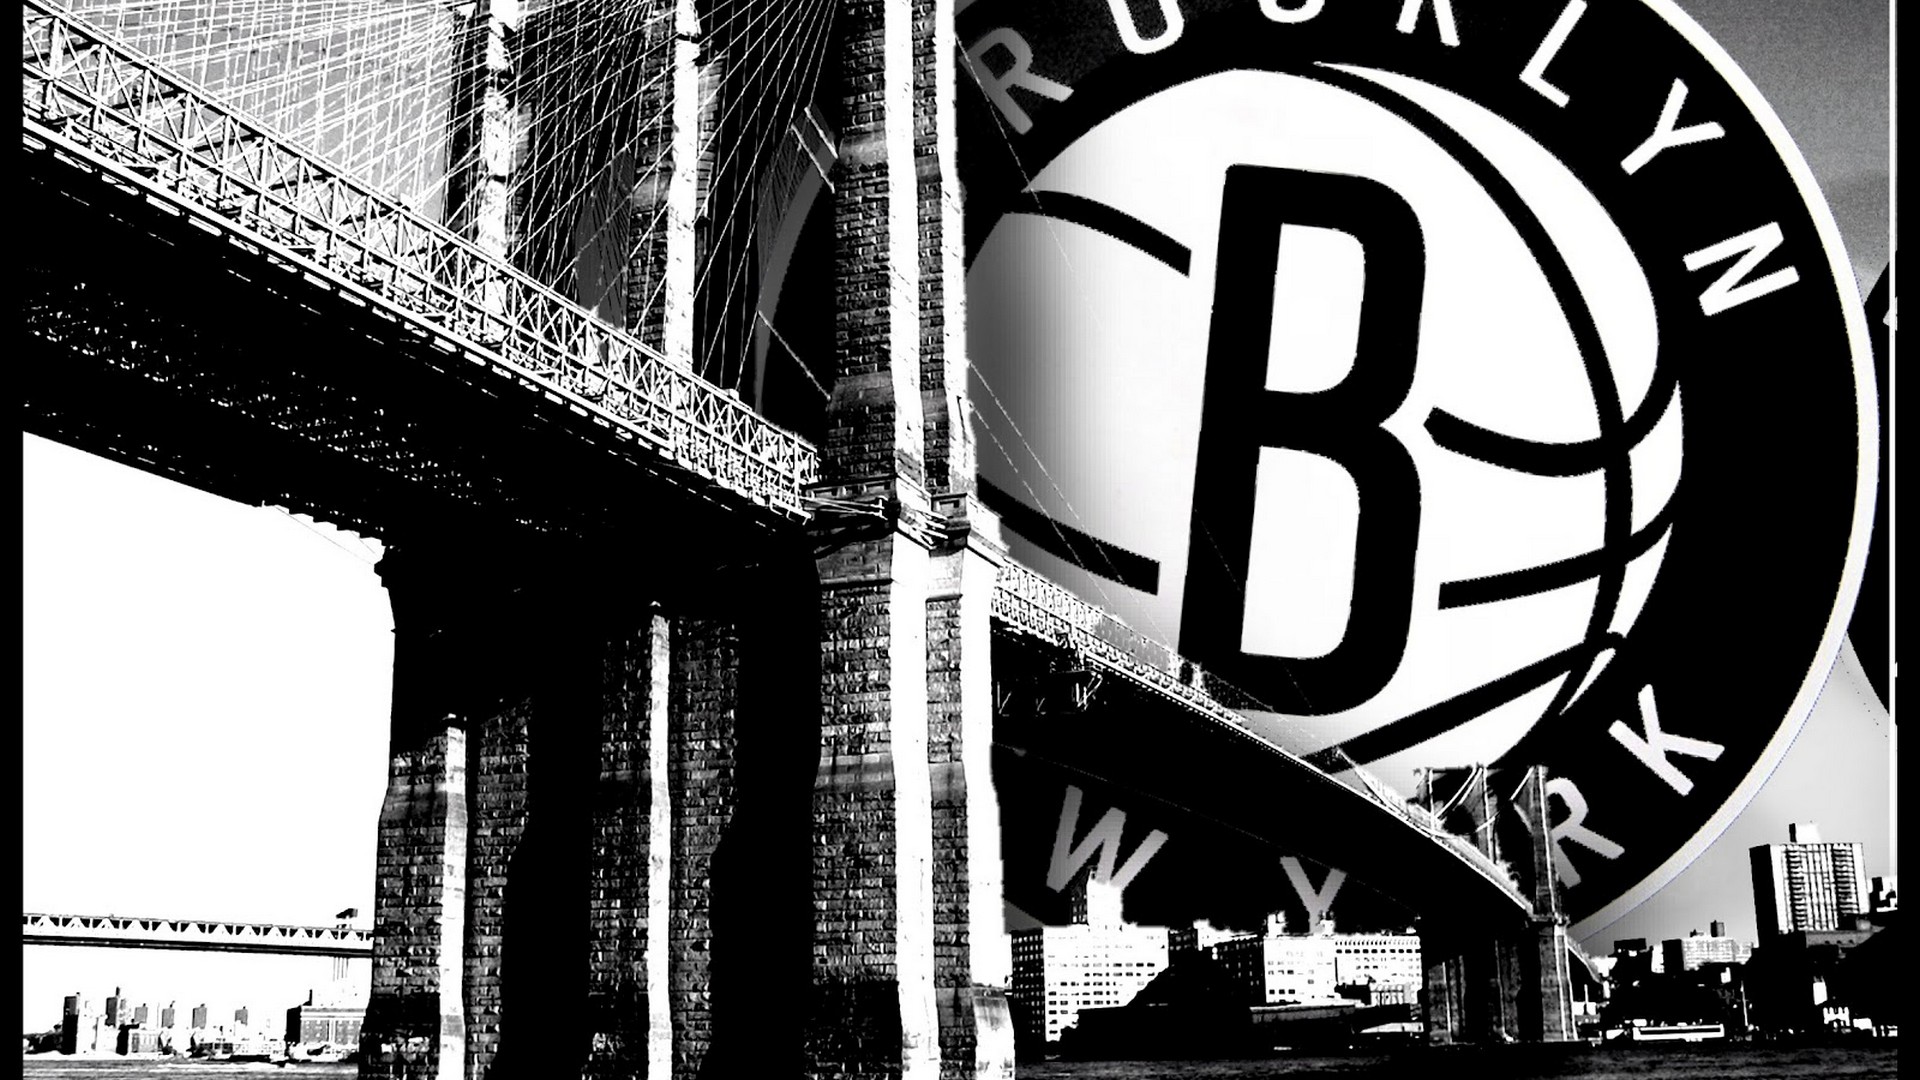 Wallpaper Desktop Brooklyn Nets HD with image dimensions 1920x1080 pixel. You can make this wallpaper for your Desktop Computer Backgrounds, Windows or Mac Screensavers, iPhone Lock screen, Tablet or Android and another Mobile Phone device